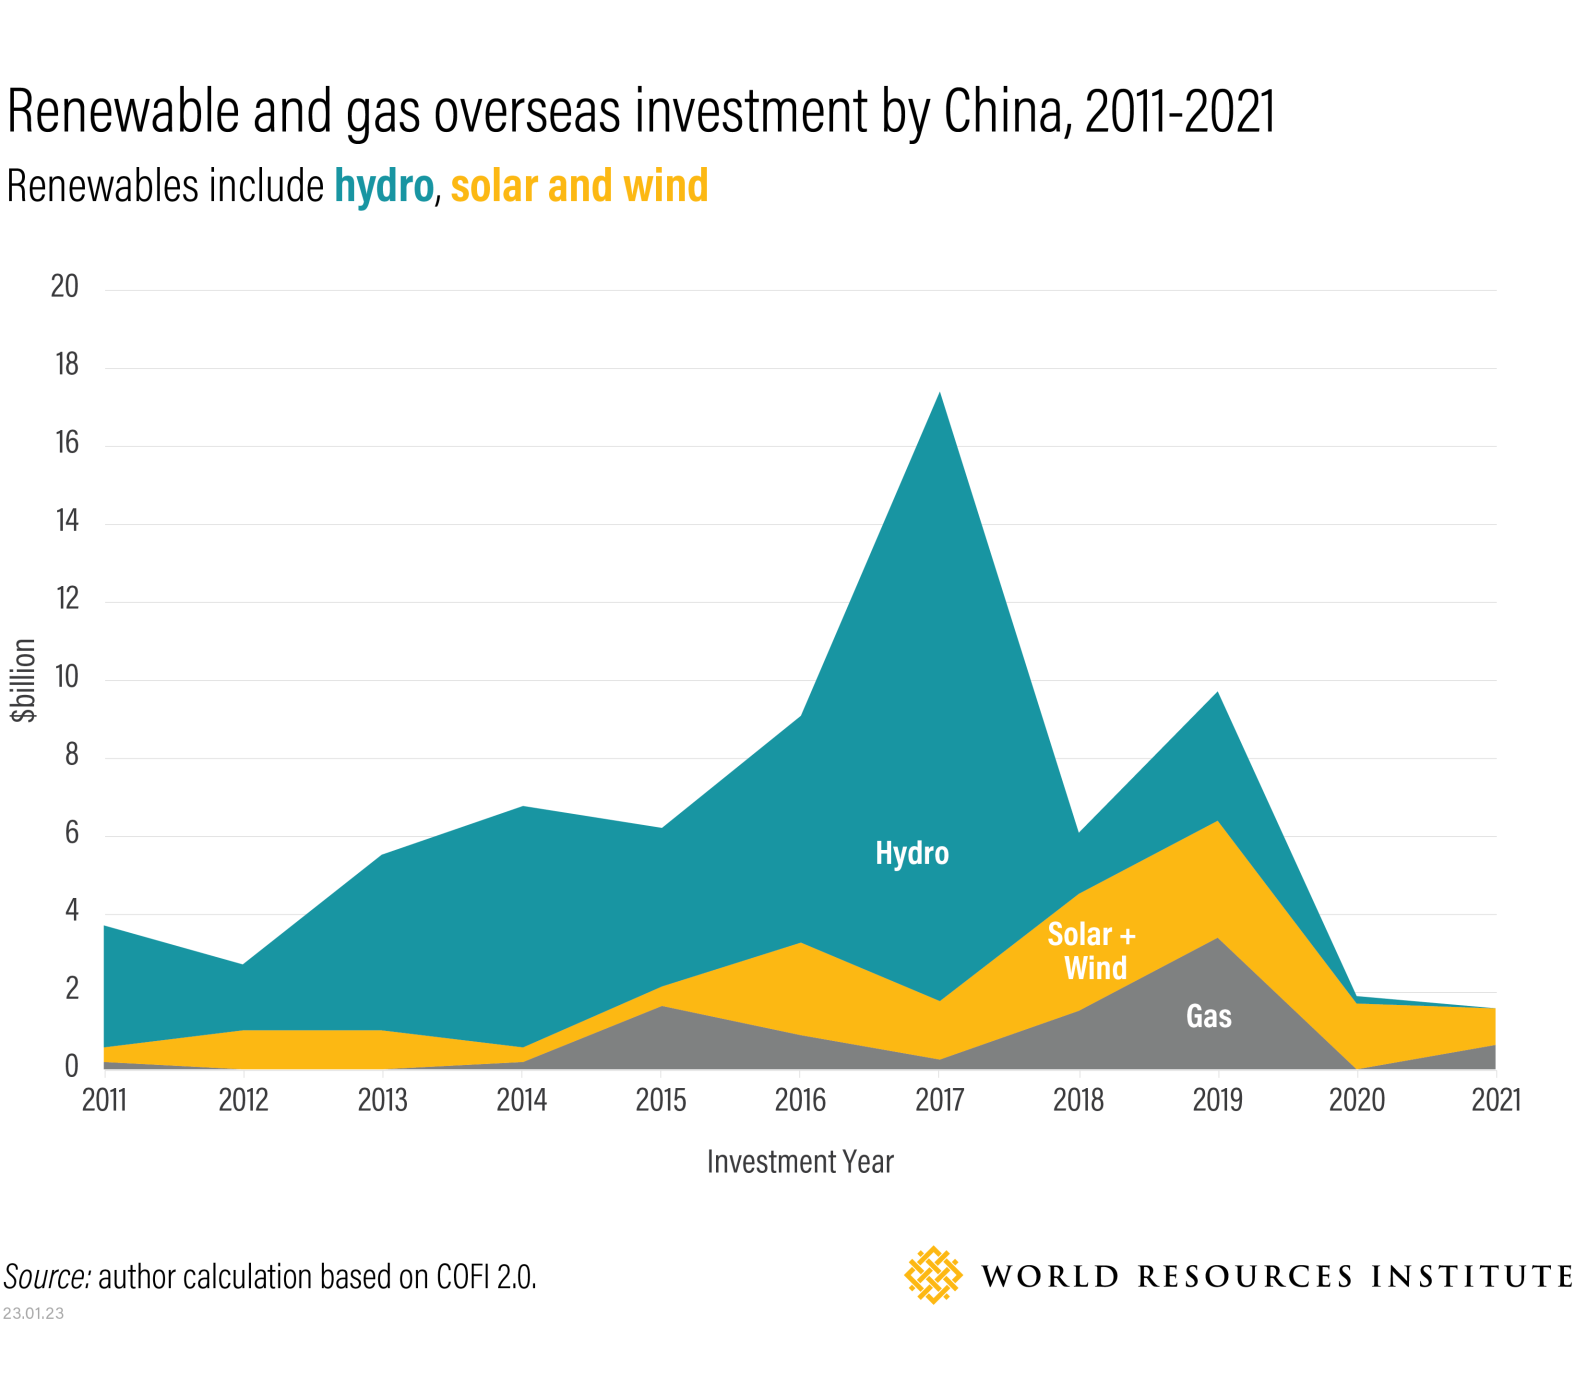 China's renewable and gas overseas investment 2011-2021